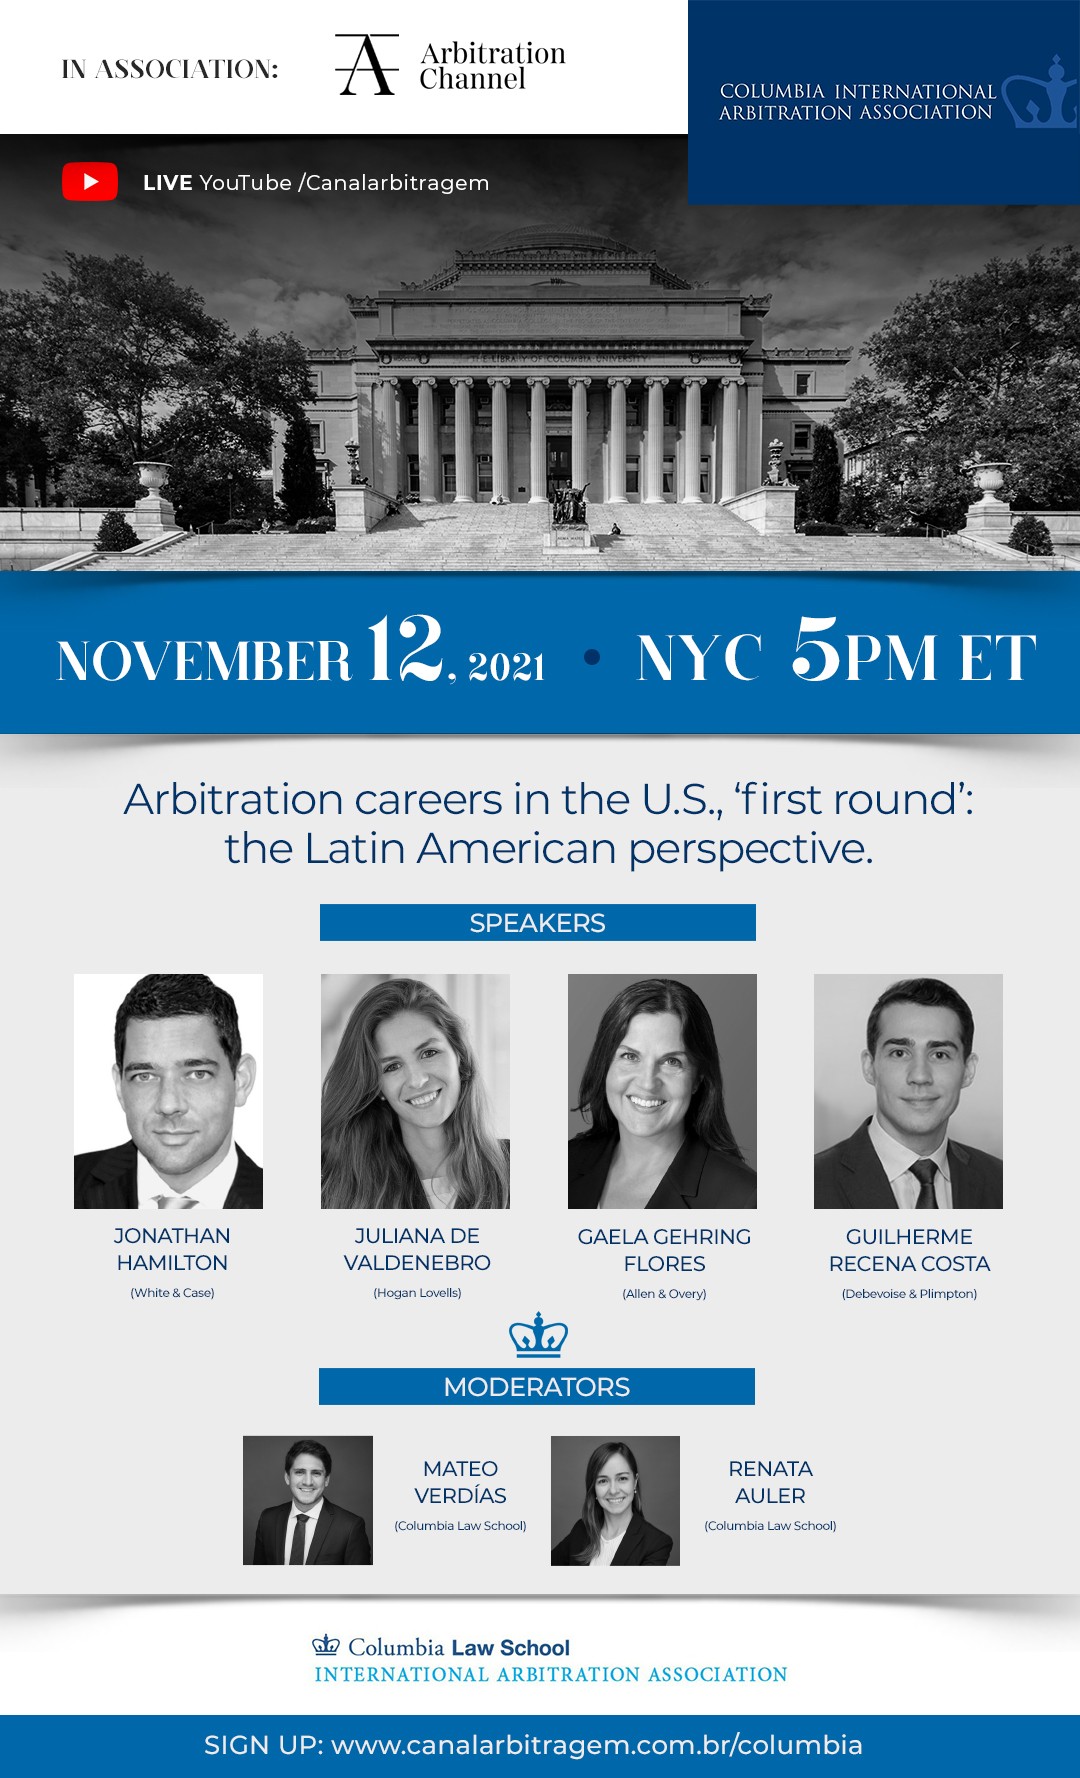 The speakers at this event are Jonathan Hamilton, Juliana De Valdenbro, Gaela Gehring Flores and Guilherme Recena Costa.This panel discussion will be moderated by CLS students Mateo Verdías and Renata Auler. 